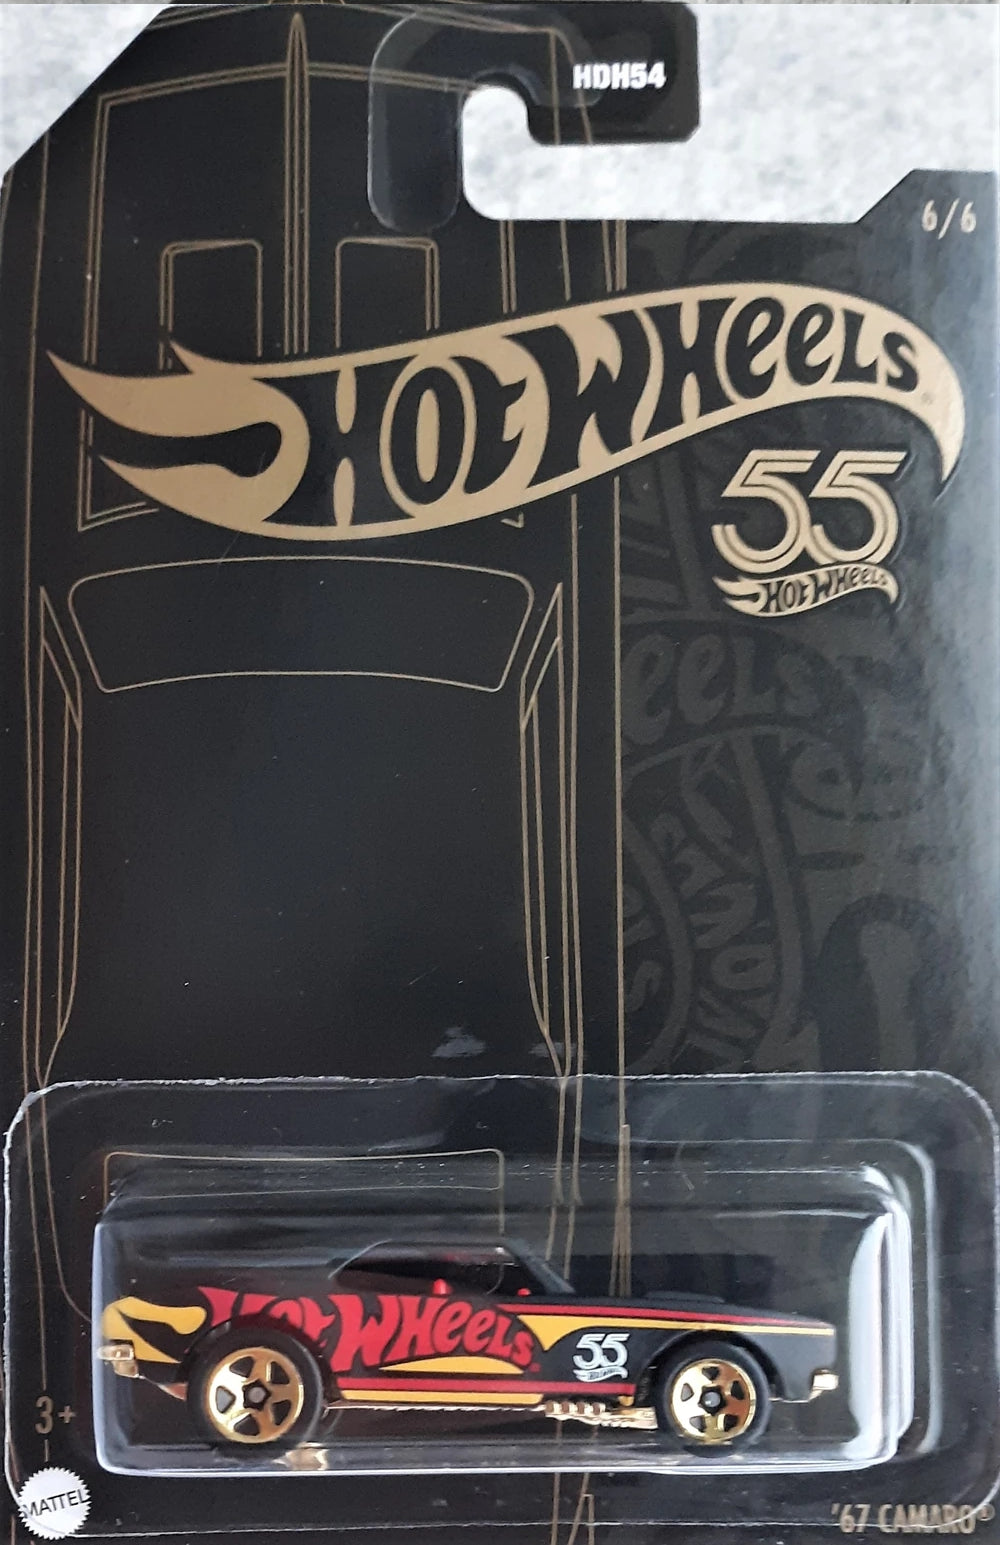 Hot Wheels 55th Anniversary Pearl and Chrome Series 5-Pack (Mix 2) - HLK02 - HDH54-956D